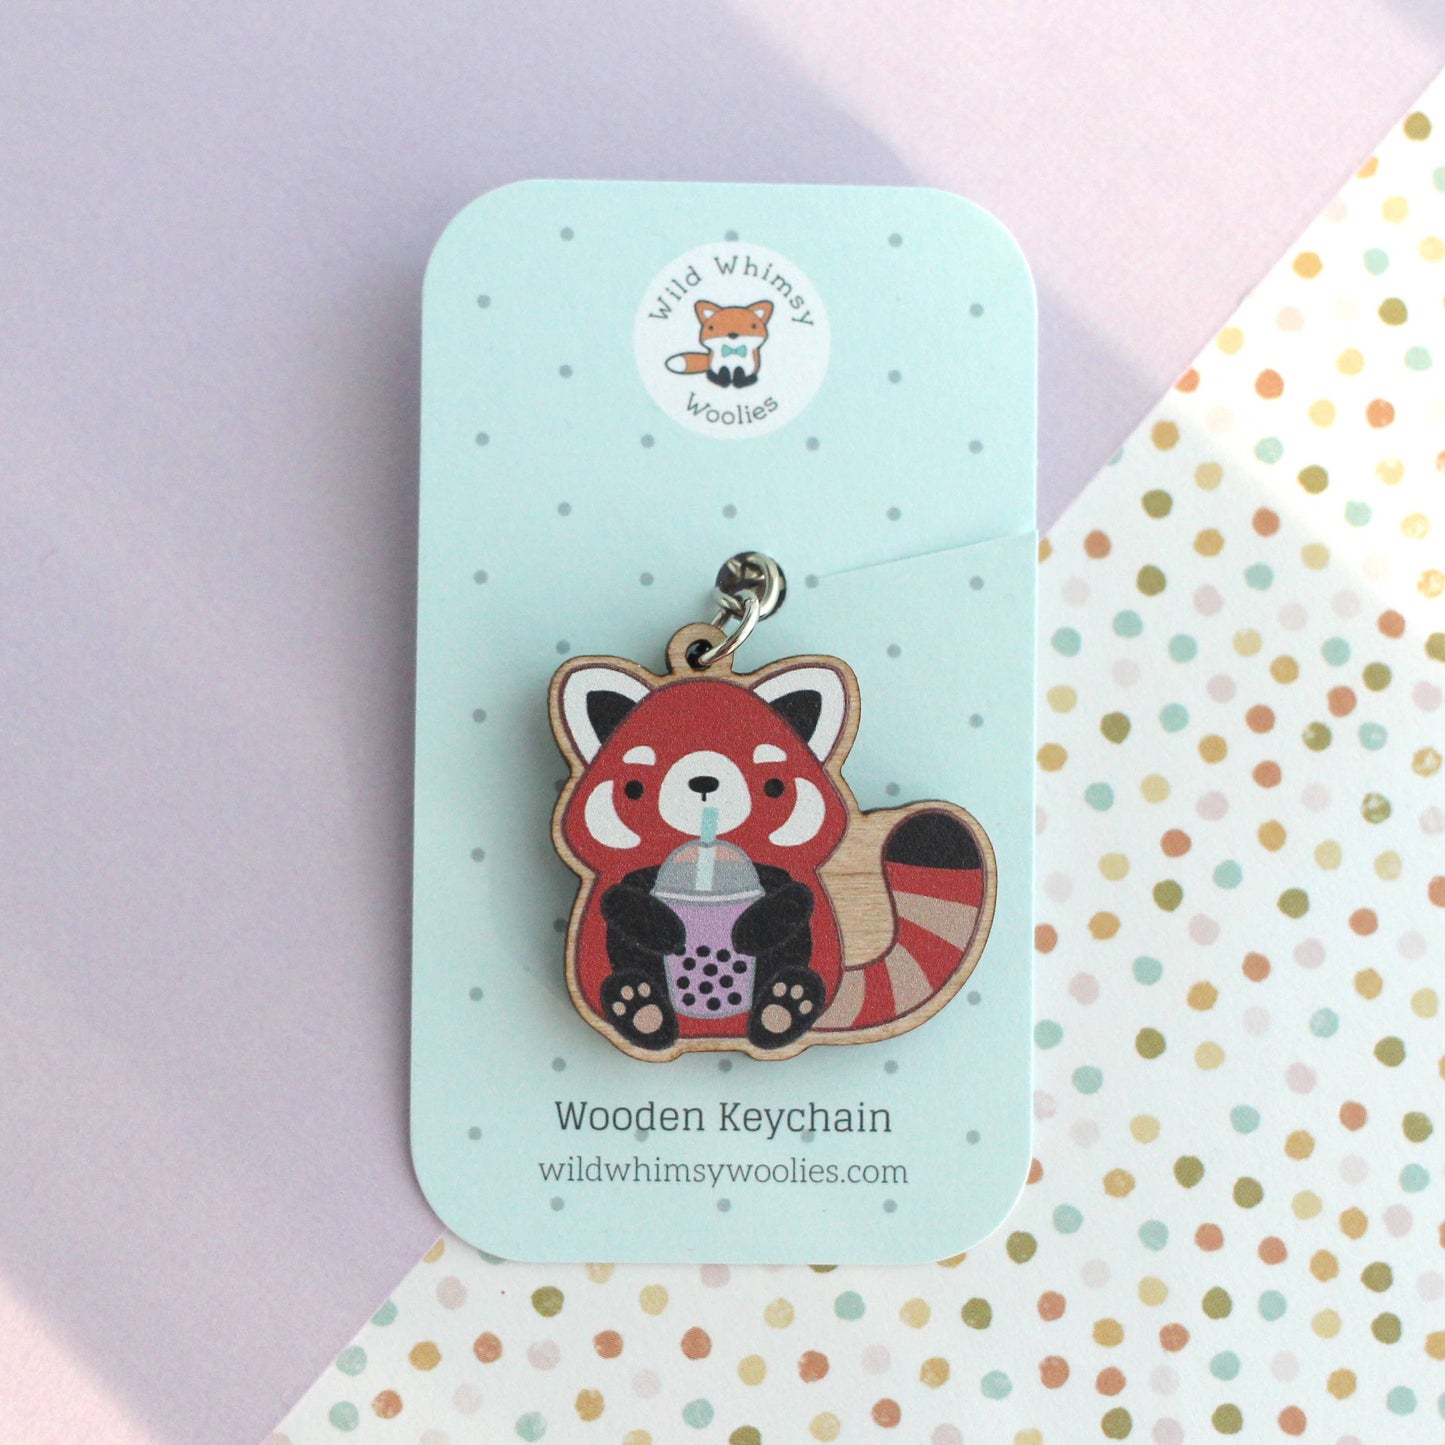 Red Panda holding Bubble Tea / Boba Wooden Keychain